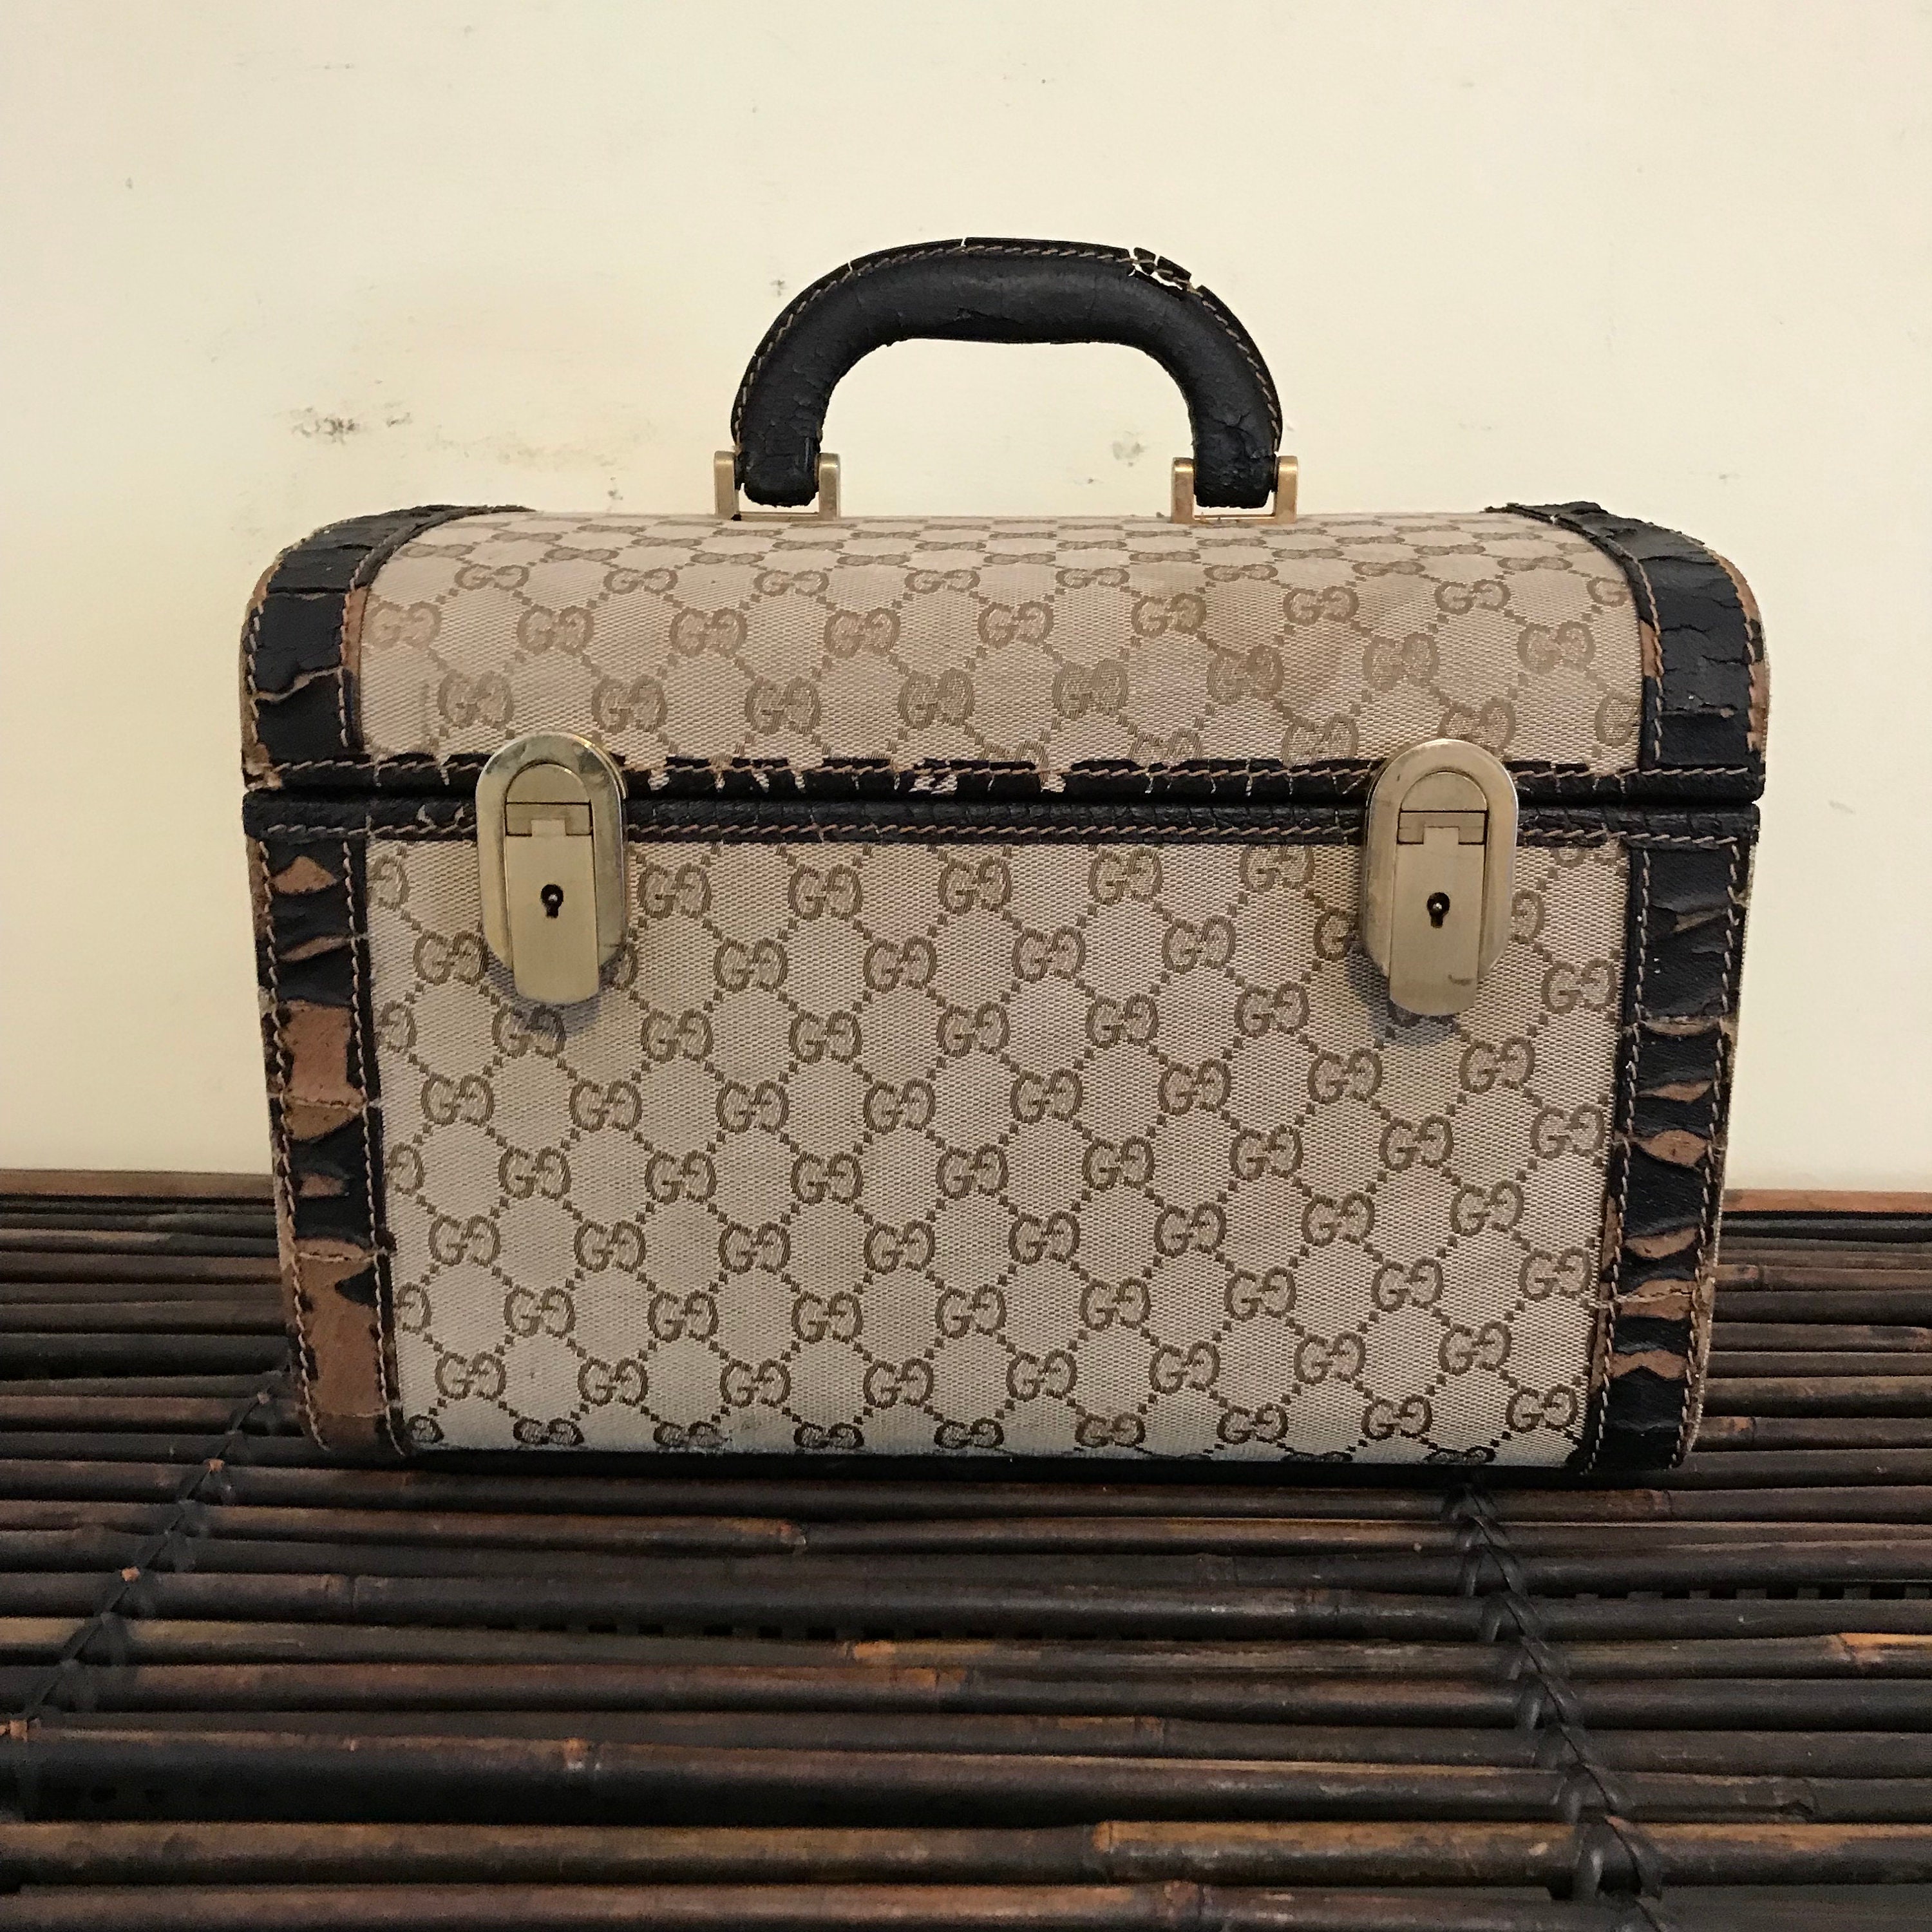 Buy Free Shipping Authentic Pre-owned Louis Vuitton Monogram Train Case  Cosmetic Vanity Trunk Case Bag M23570 210014 from Japan - Buy authentic  Plus exclusive items from Japan